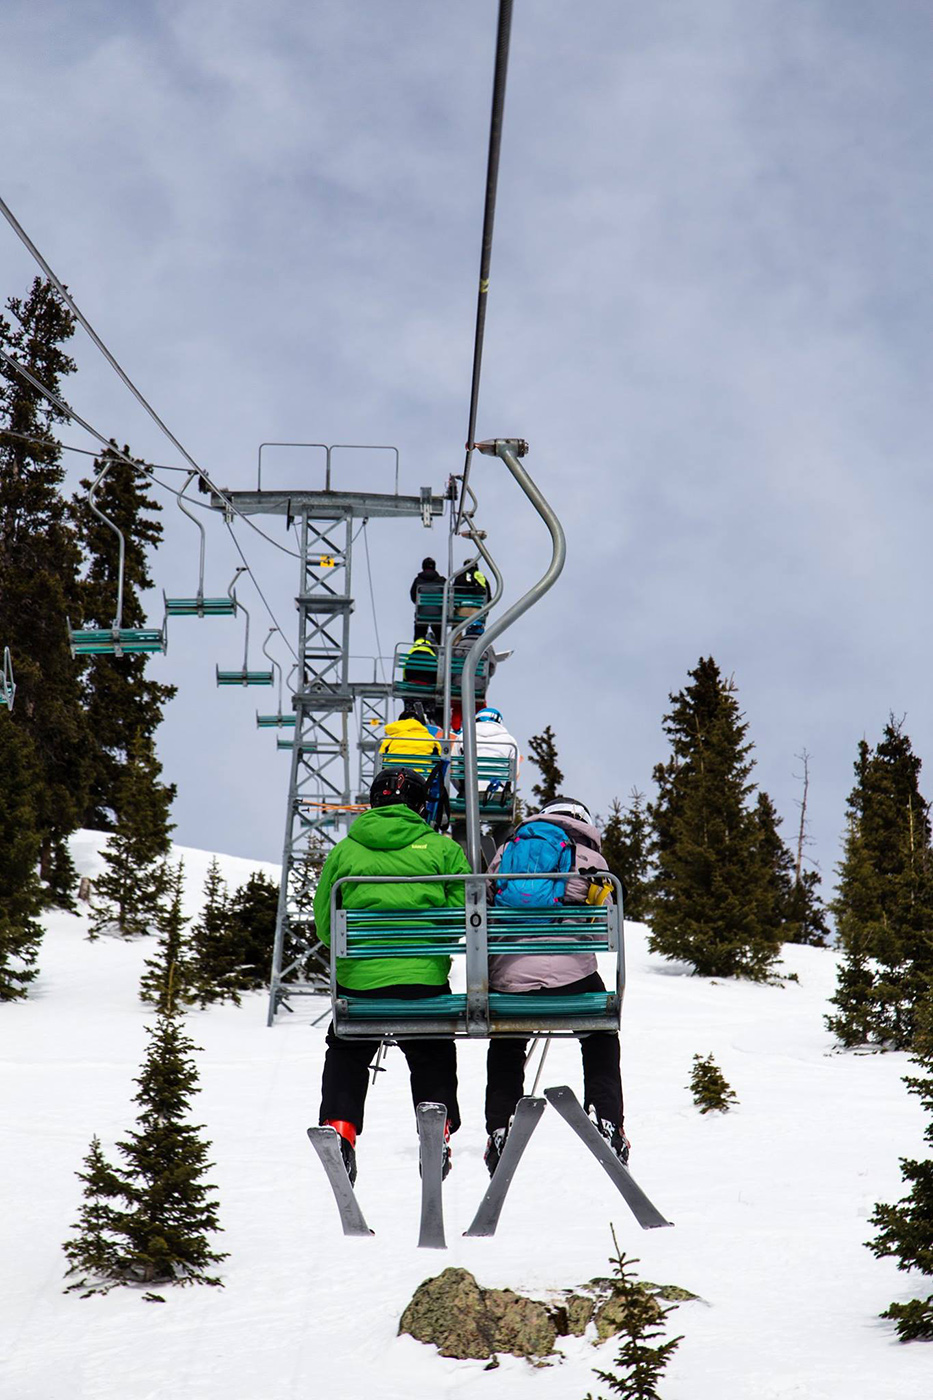 SMU-in-Taos students take the ski lift up the mountain